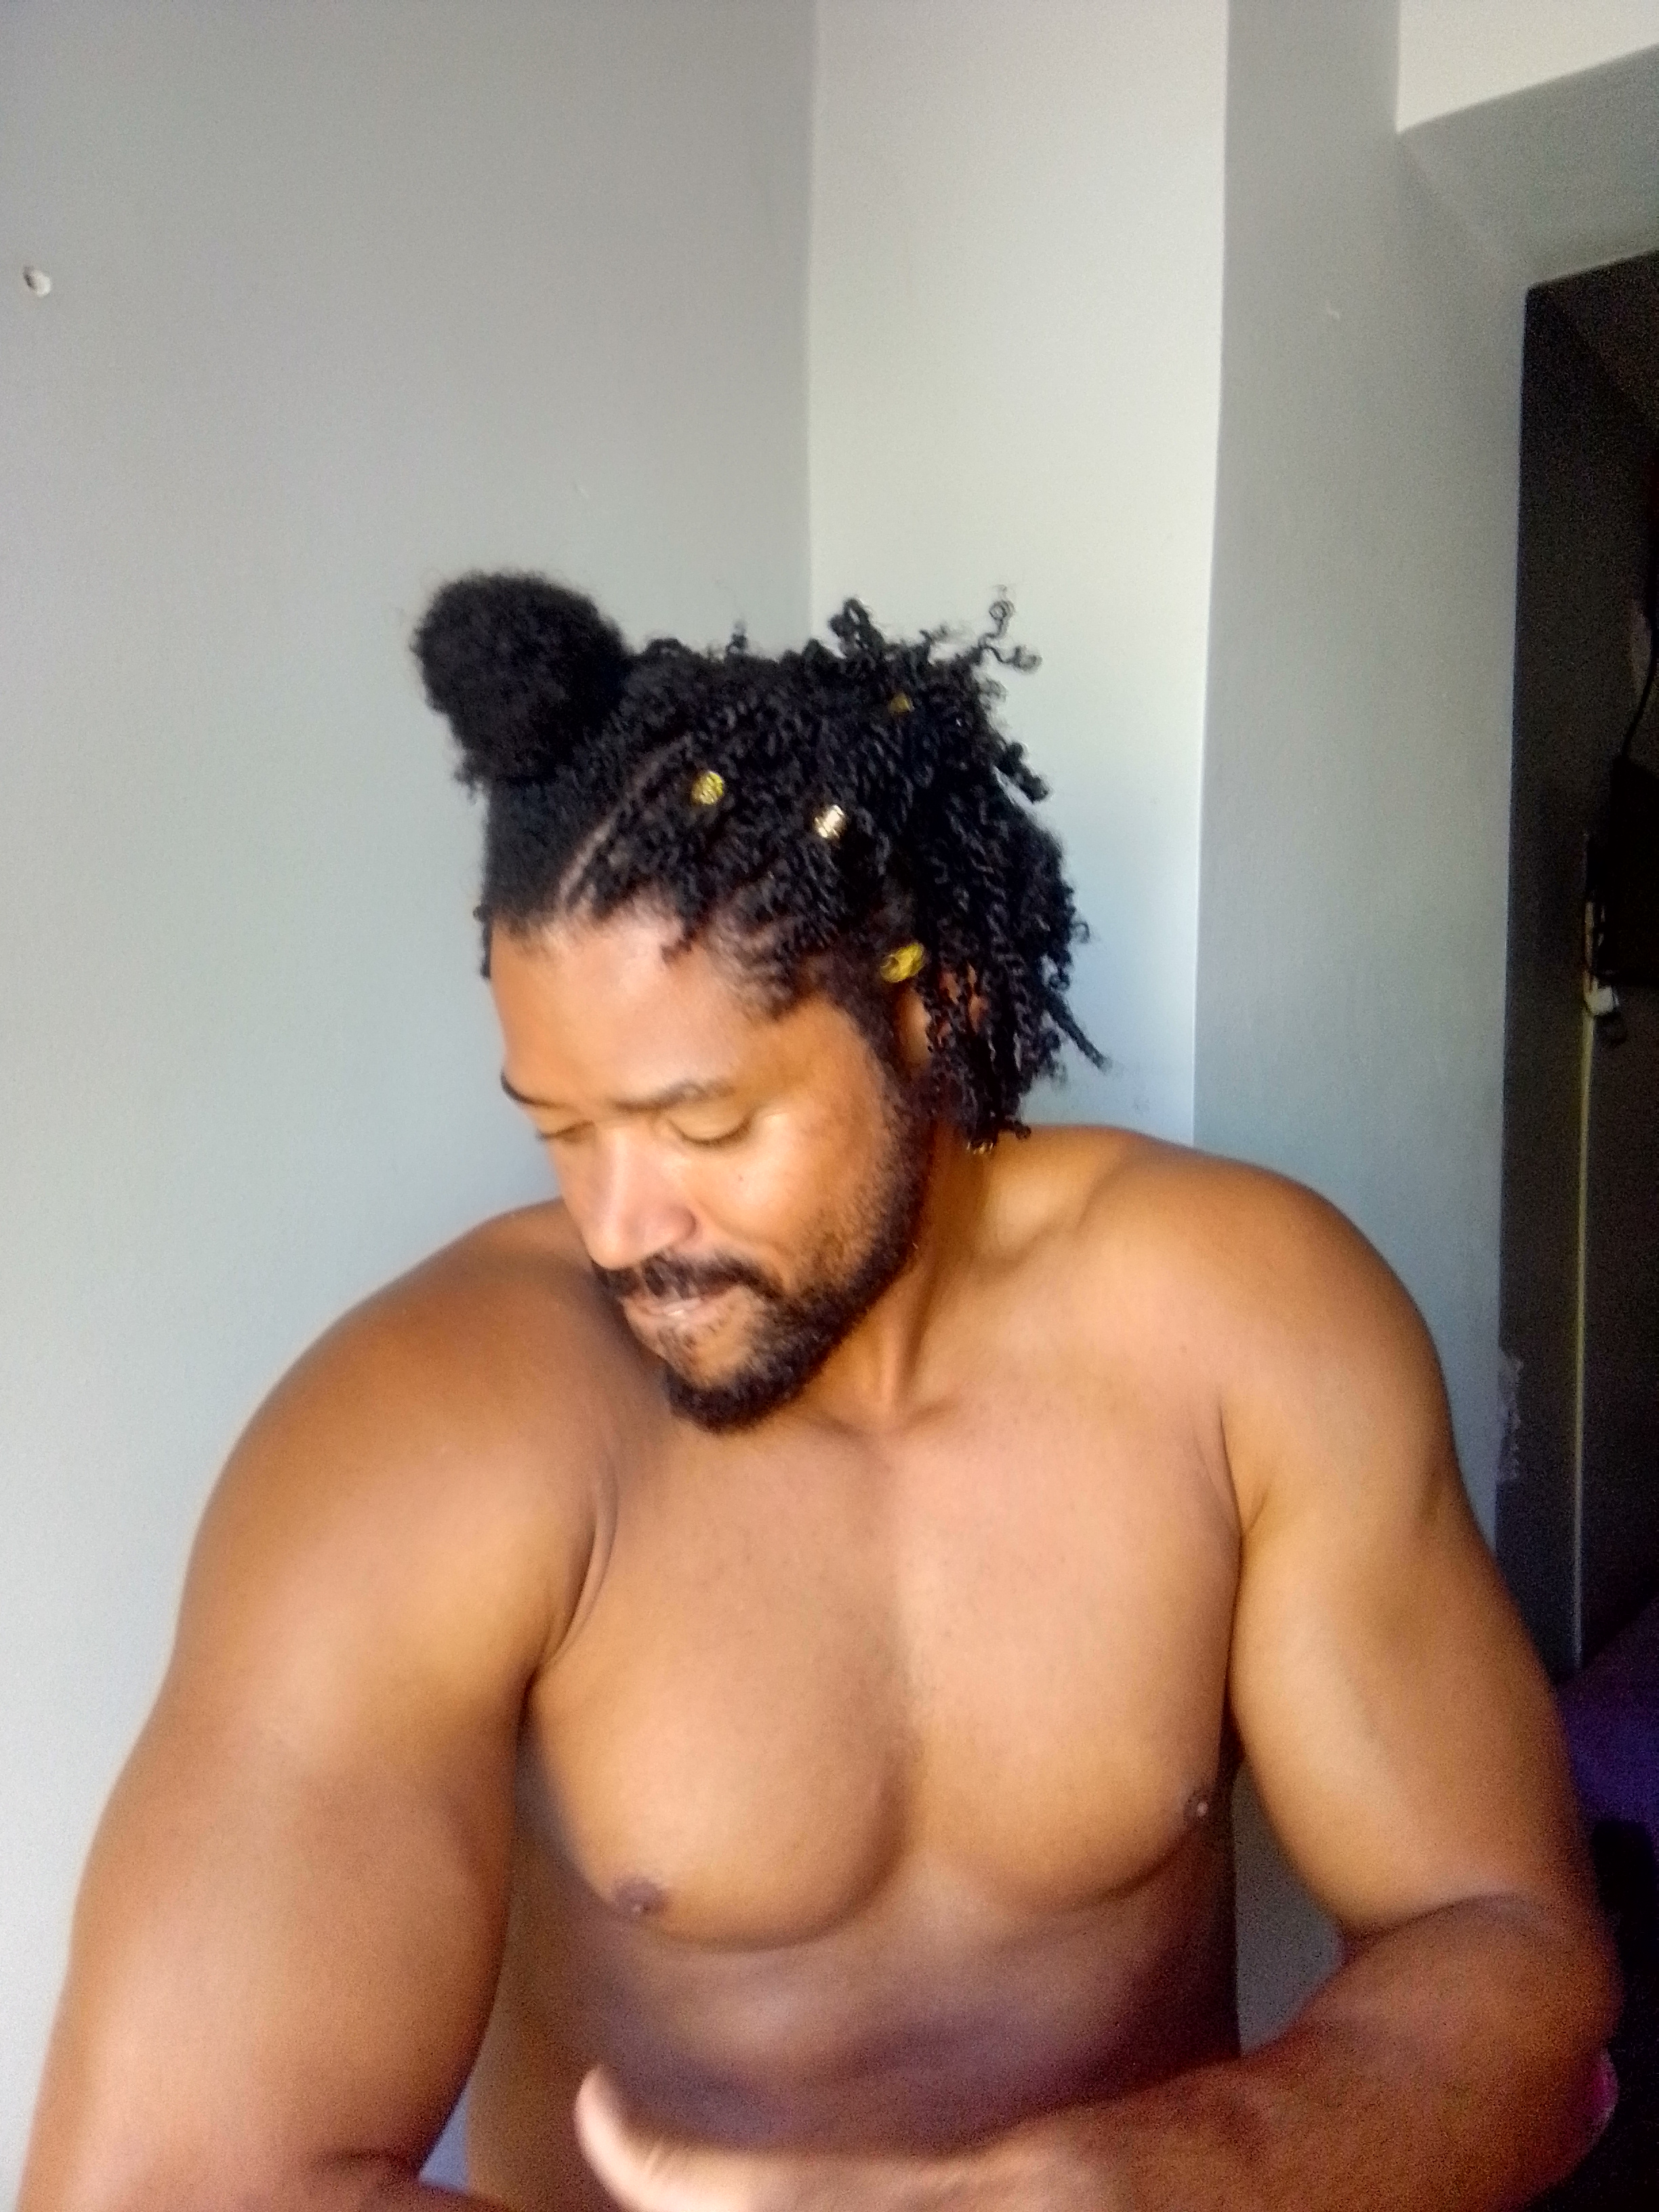 Big King Kimroy Bailey looking down on his tight abdominal muscles over to the side that are naturally built from an active life without the need for gym nor fake muscle products such as pills, shakes, injections, steroids nor surgeries. Built from a fun filled active life with his wife and kids